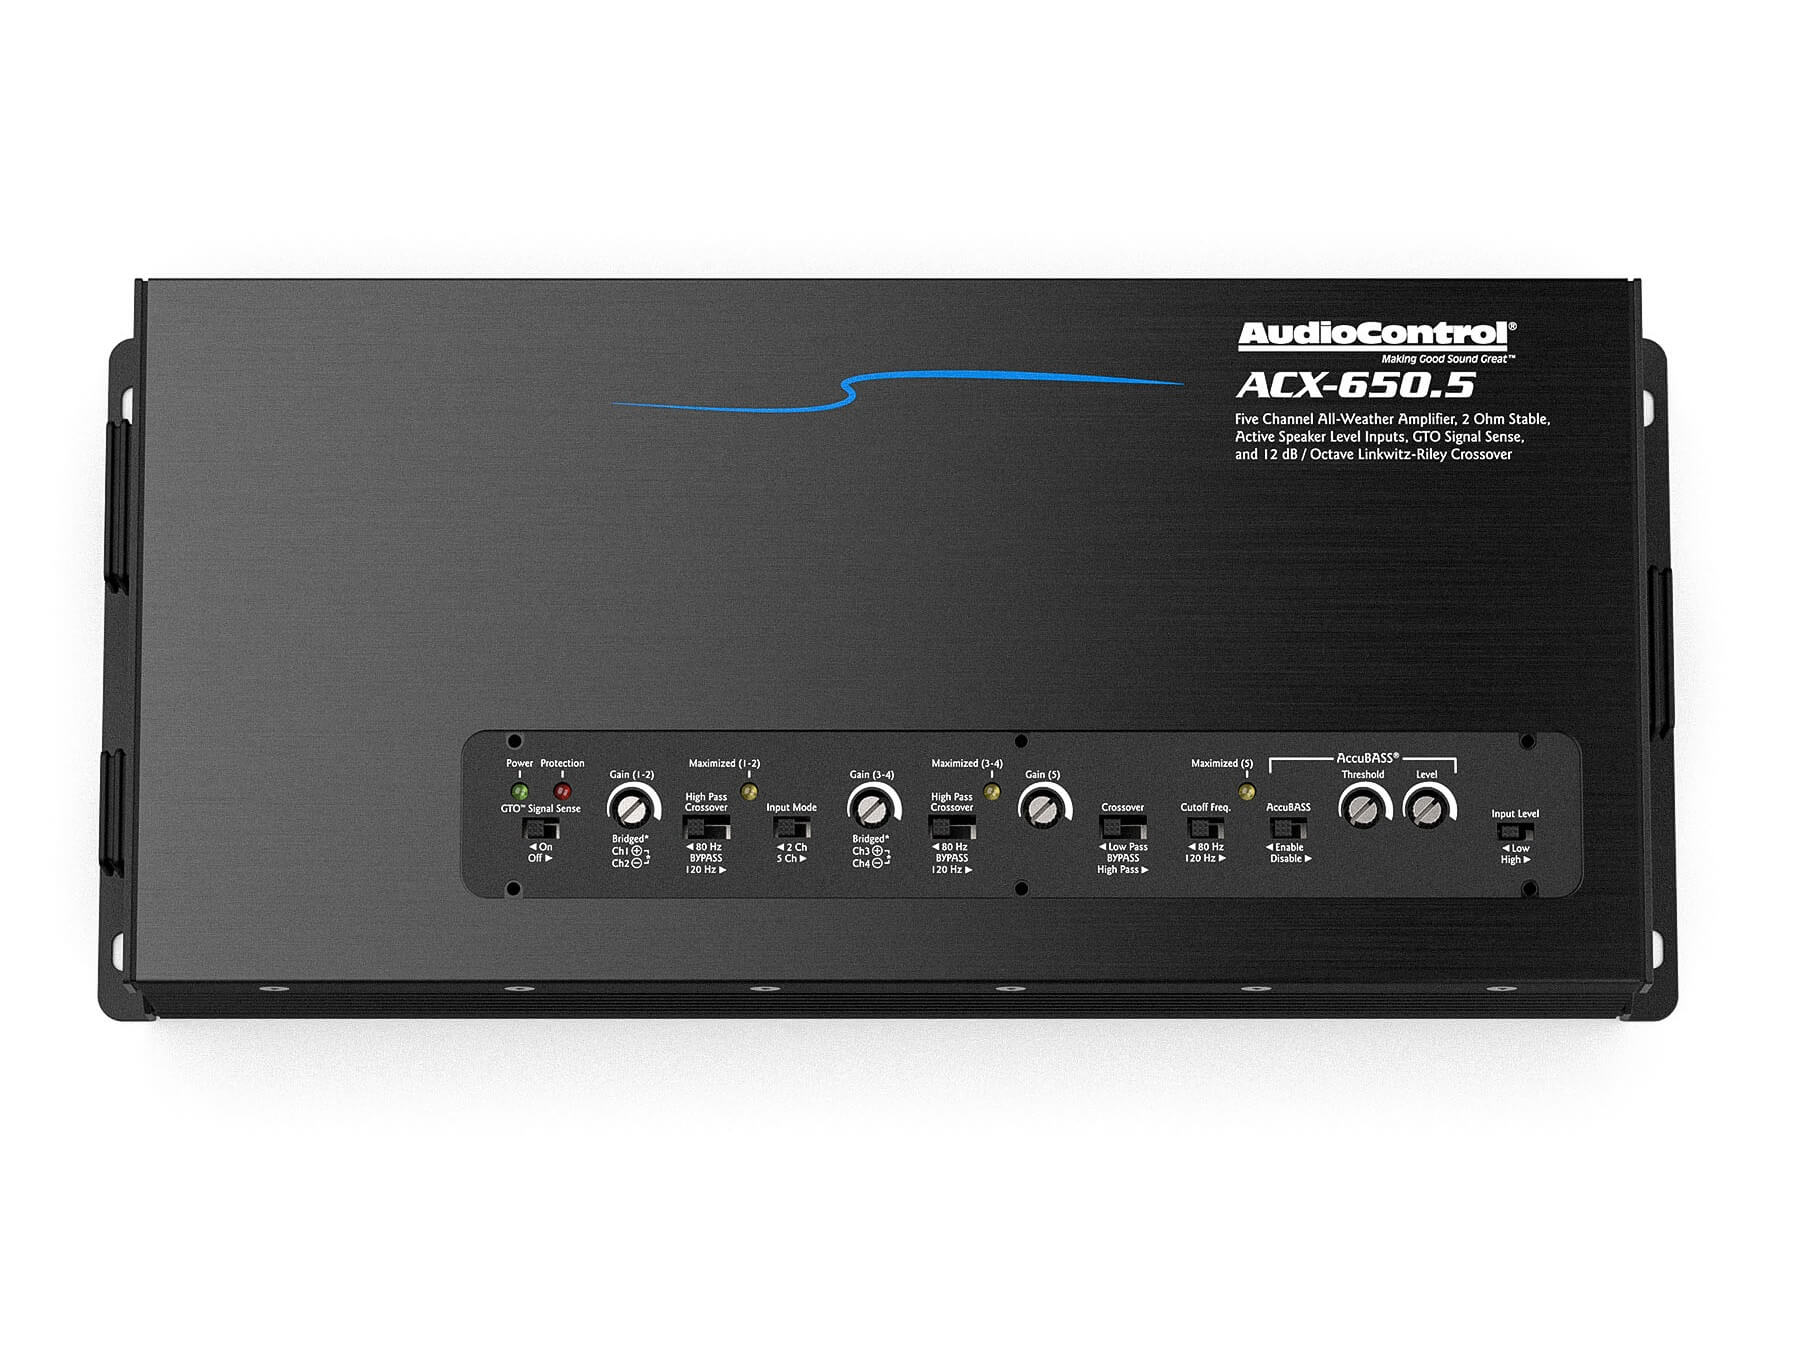 AudioControl ACX-650.5 - Top / Without Cover